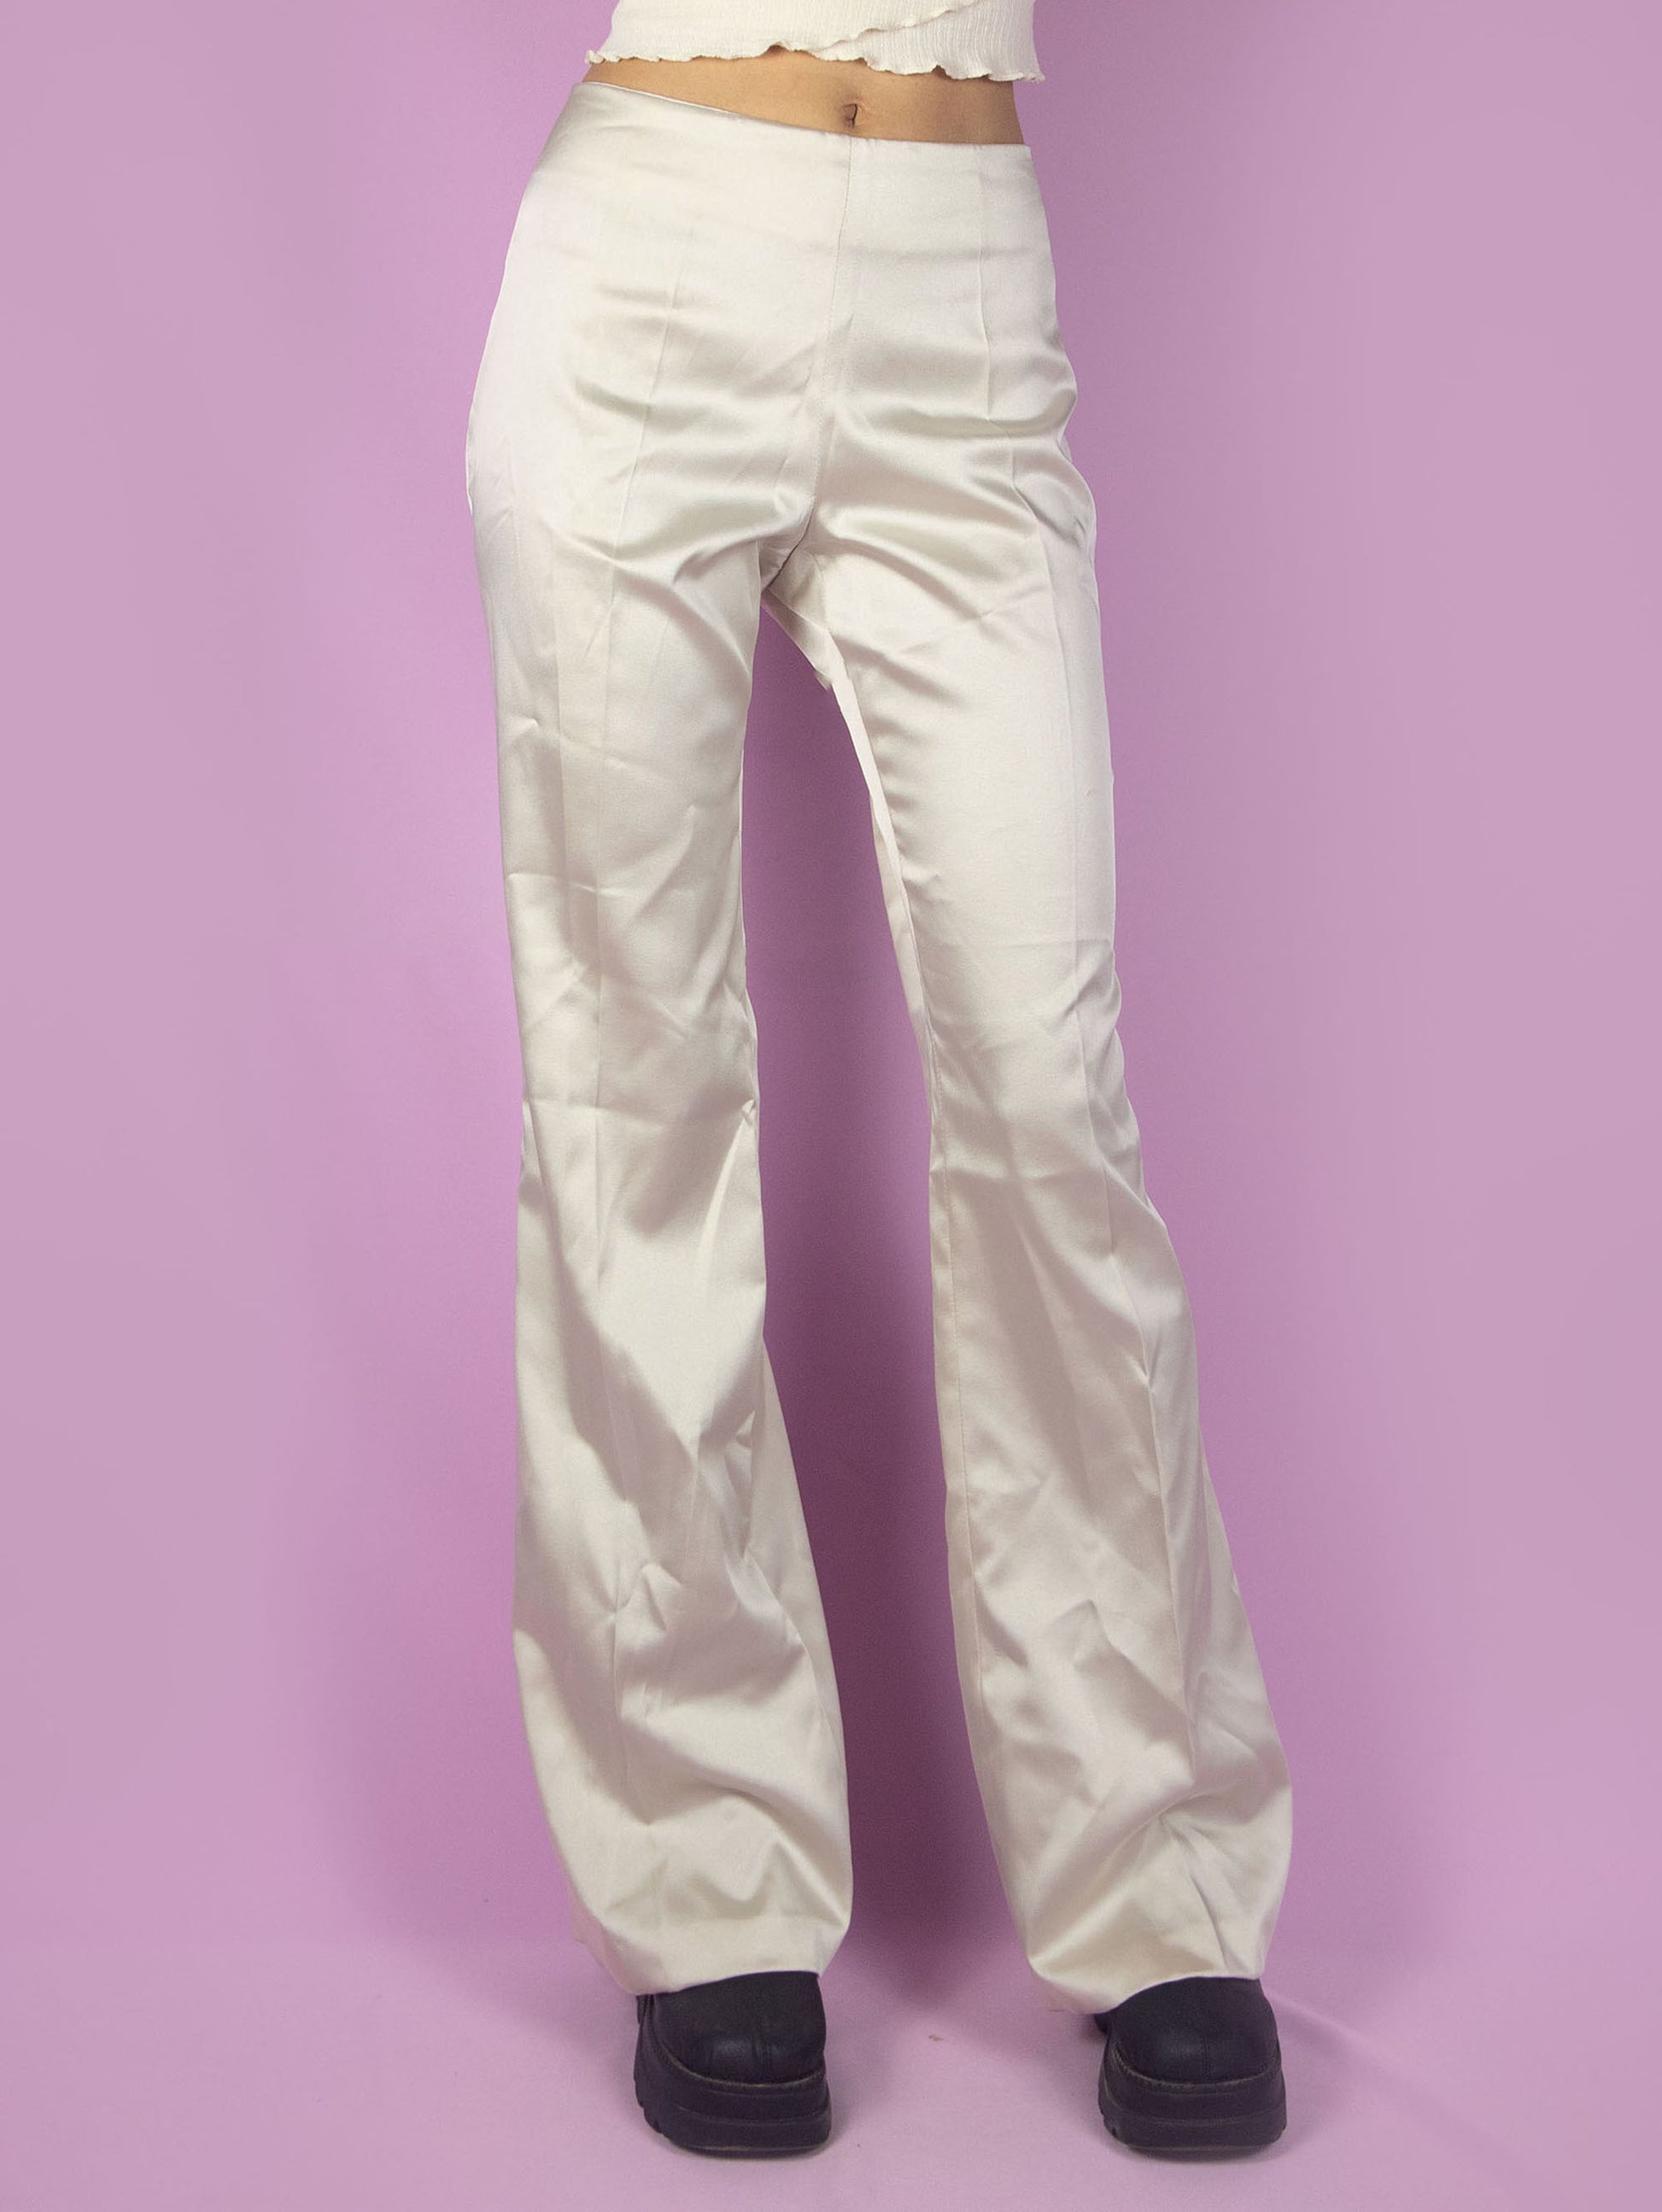 The Y2K Beige Flare Pants are vintage mid-rise shiny satin trousers, slightly elastic, with a side zipper closure. Elegant 2000s evening cocktail party trousers. Made in Italy.